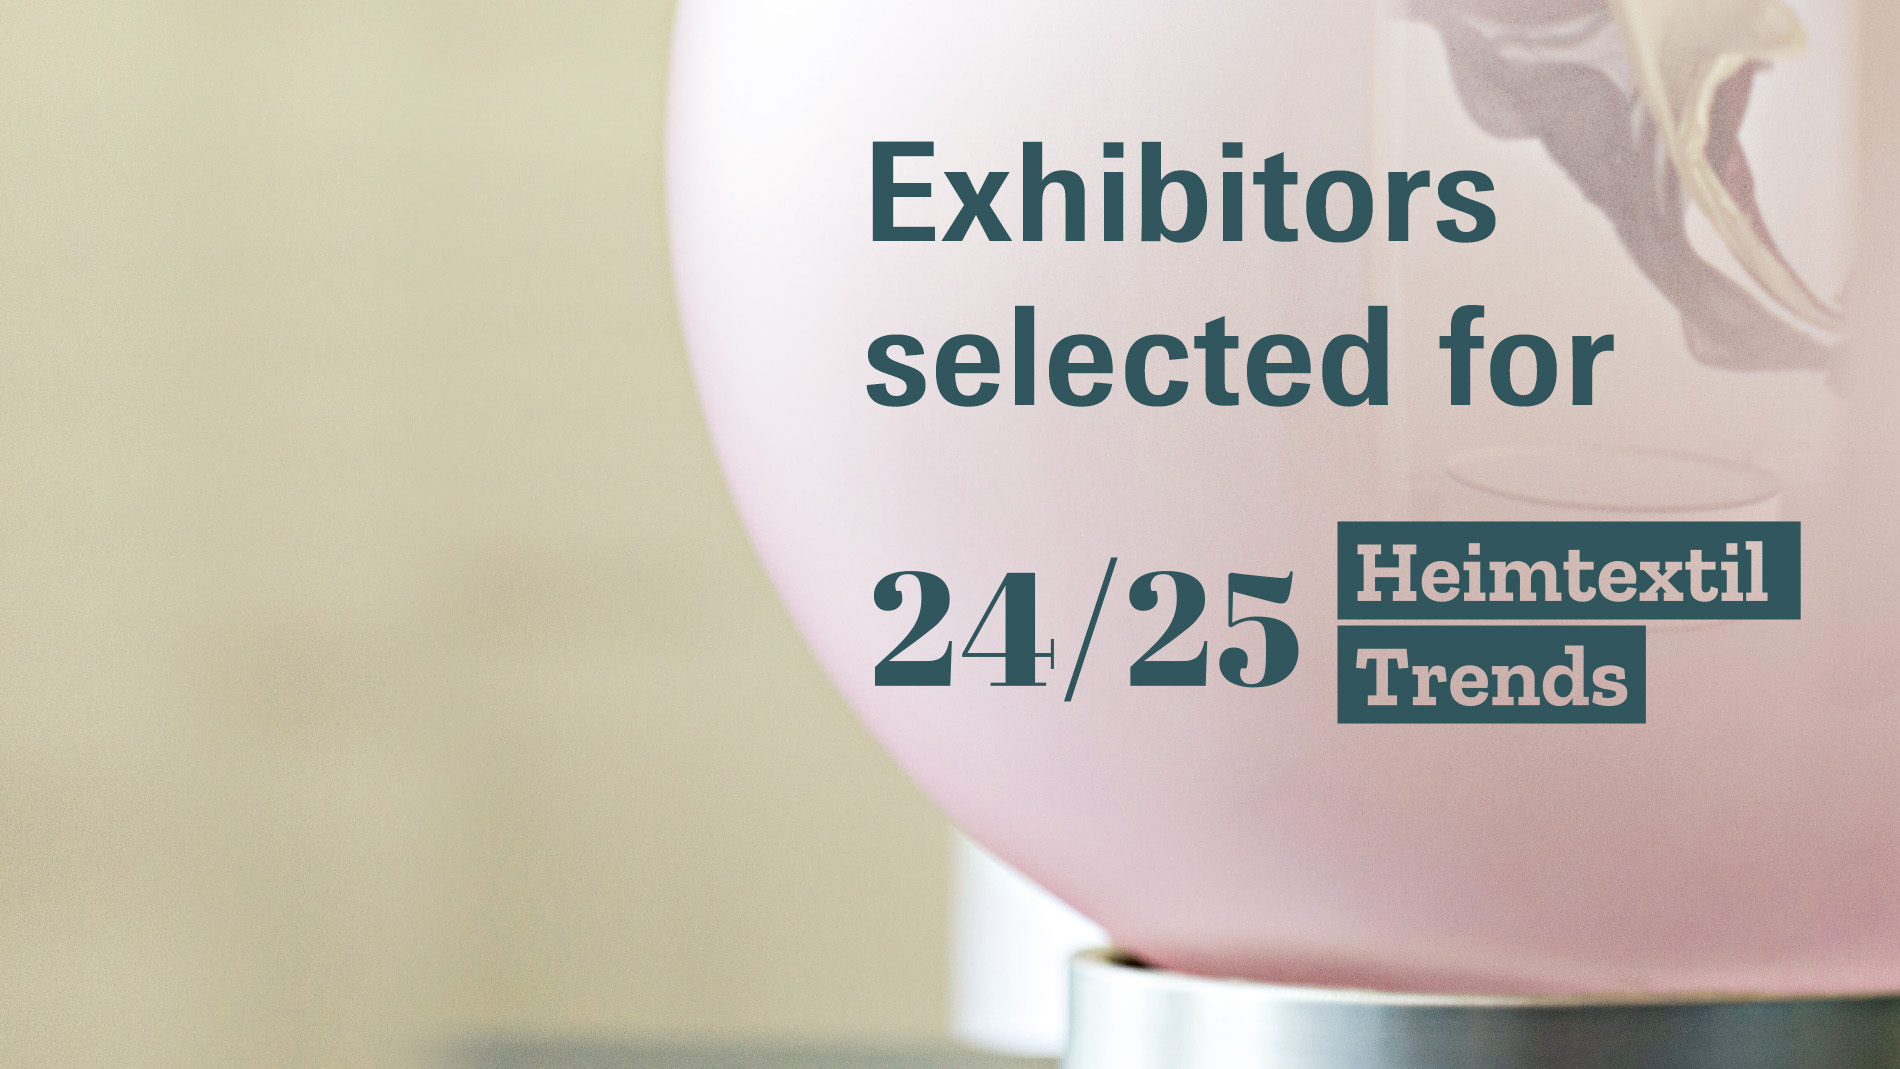 Exhibitors selected